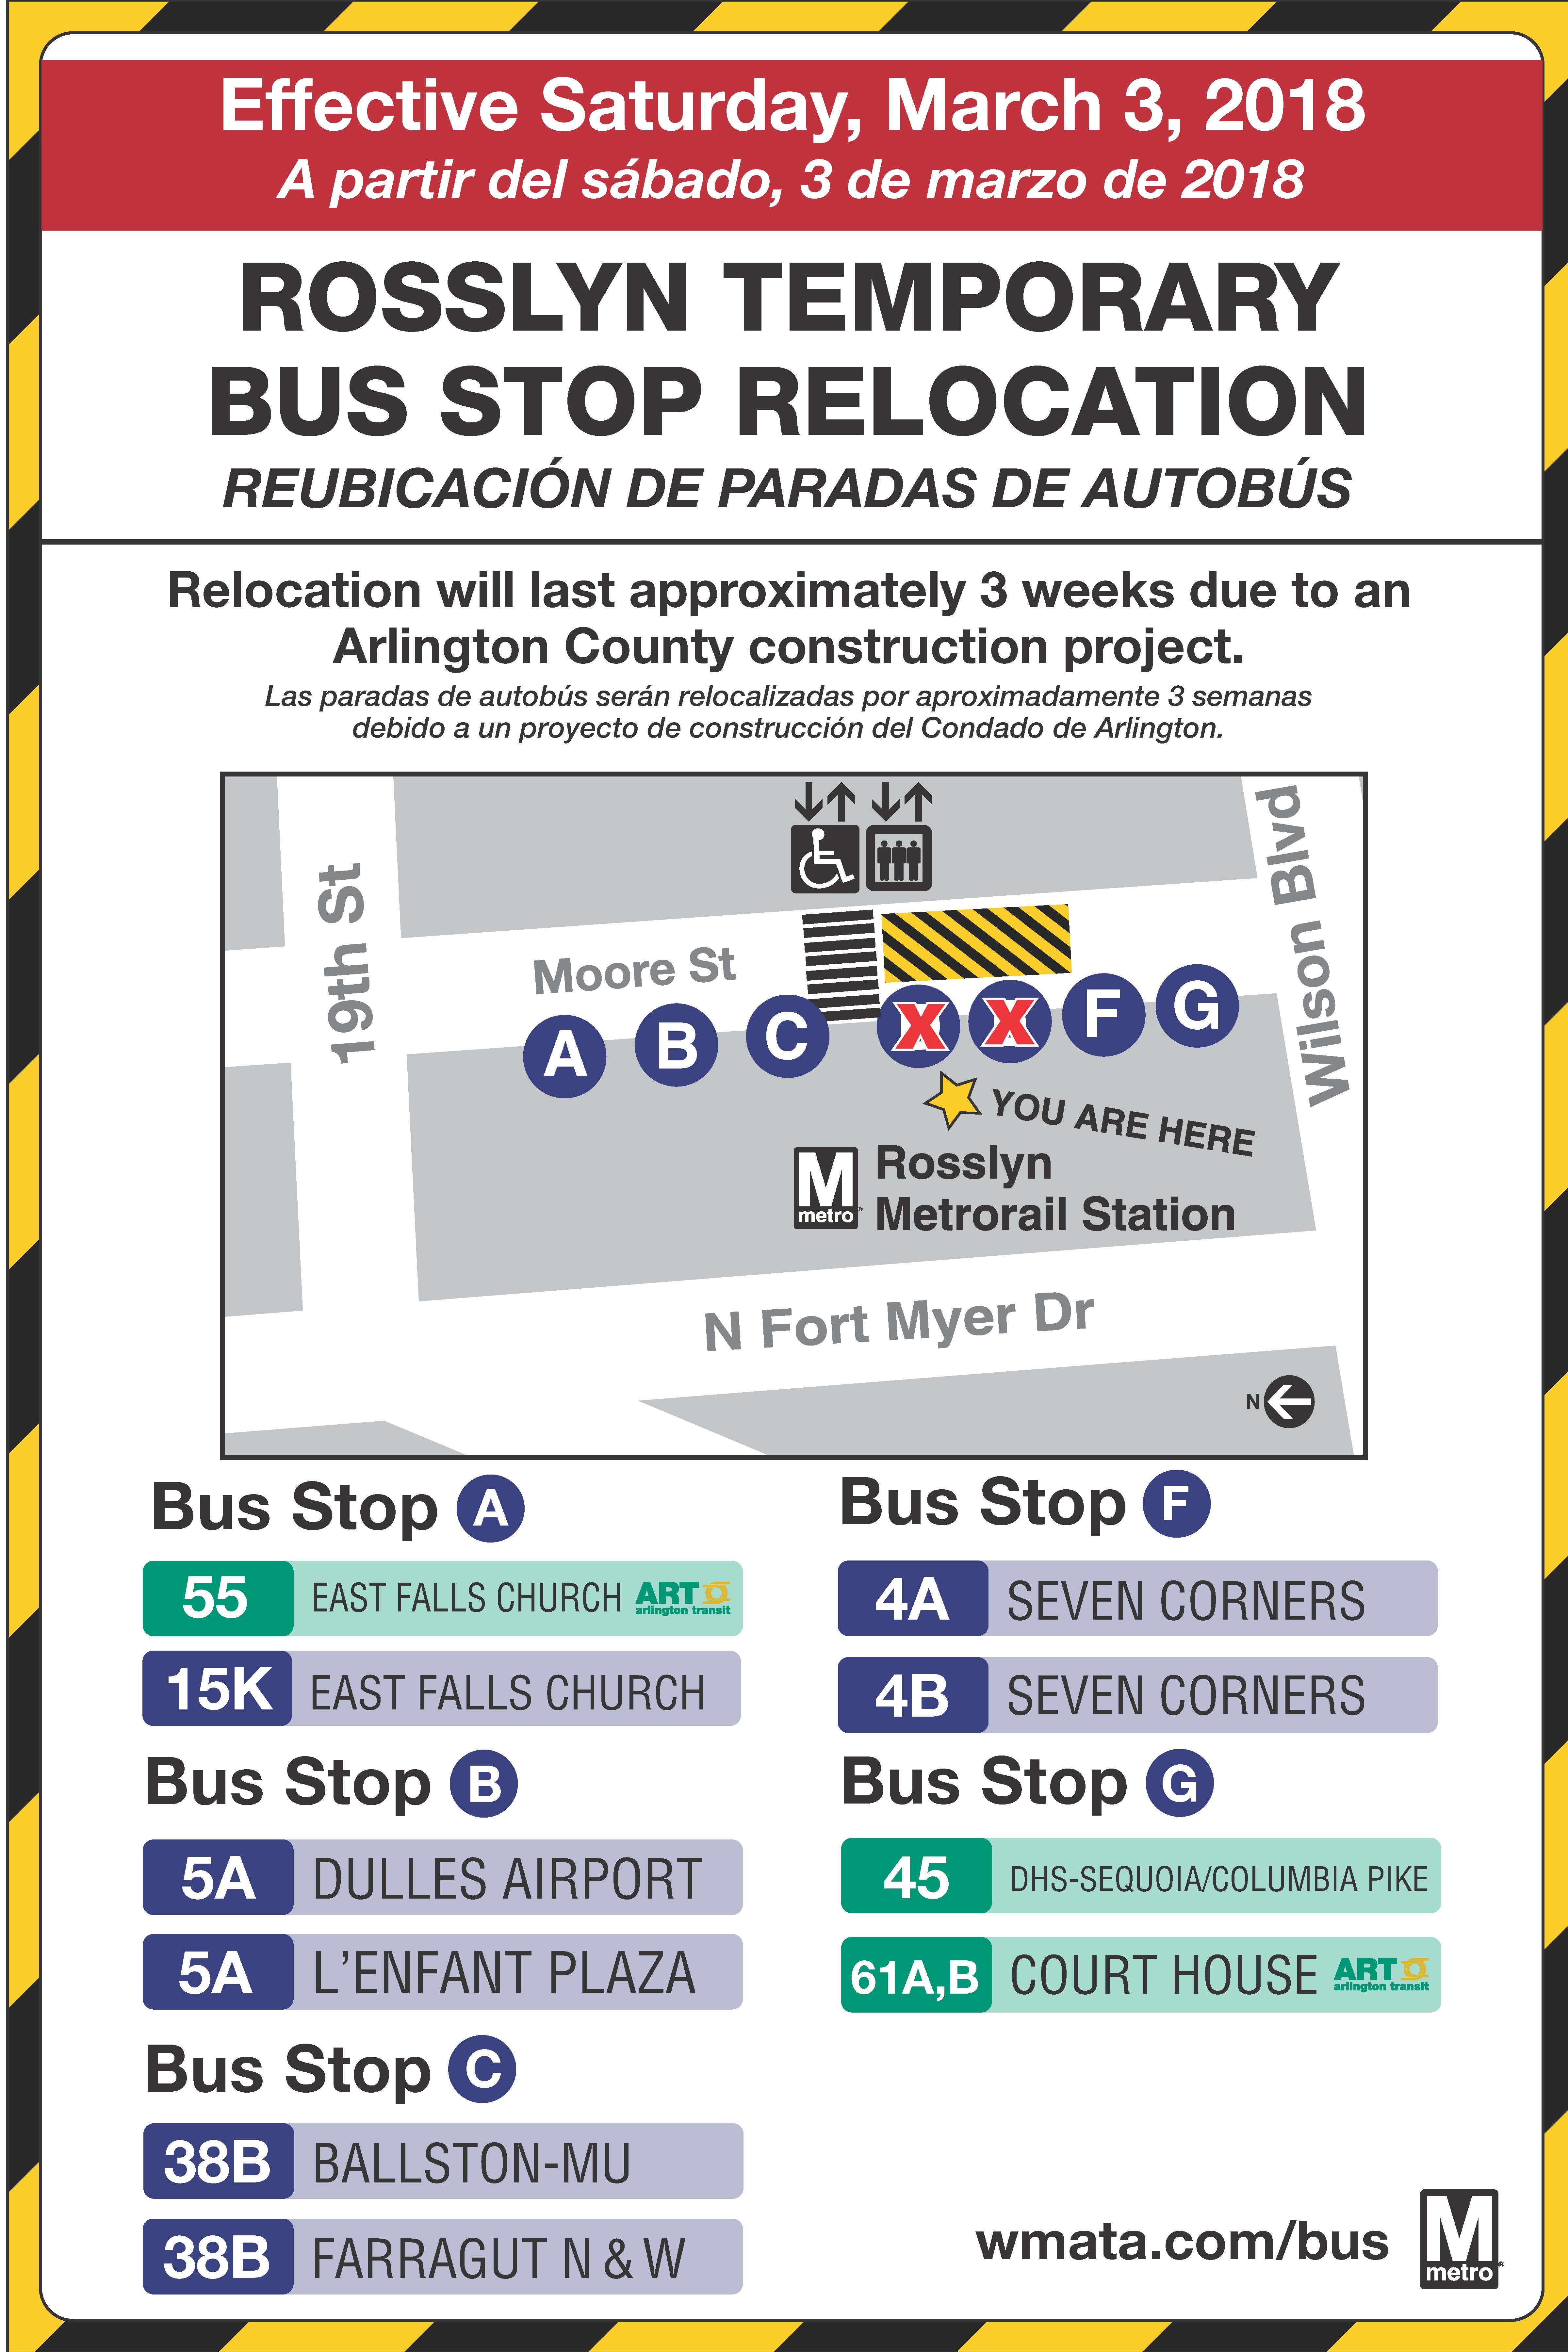 Rosslyn Bus Bay Relocation March 2018